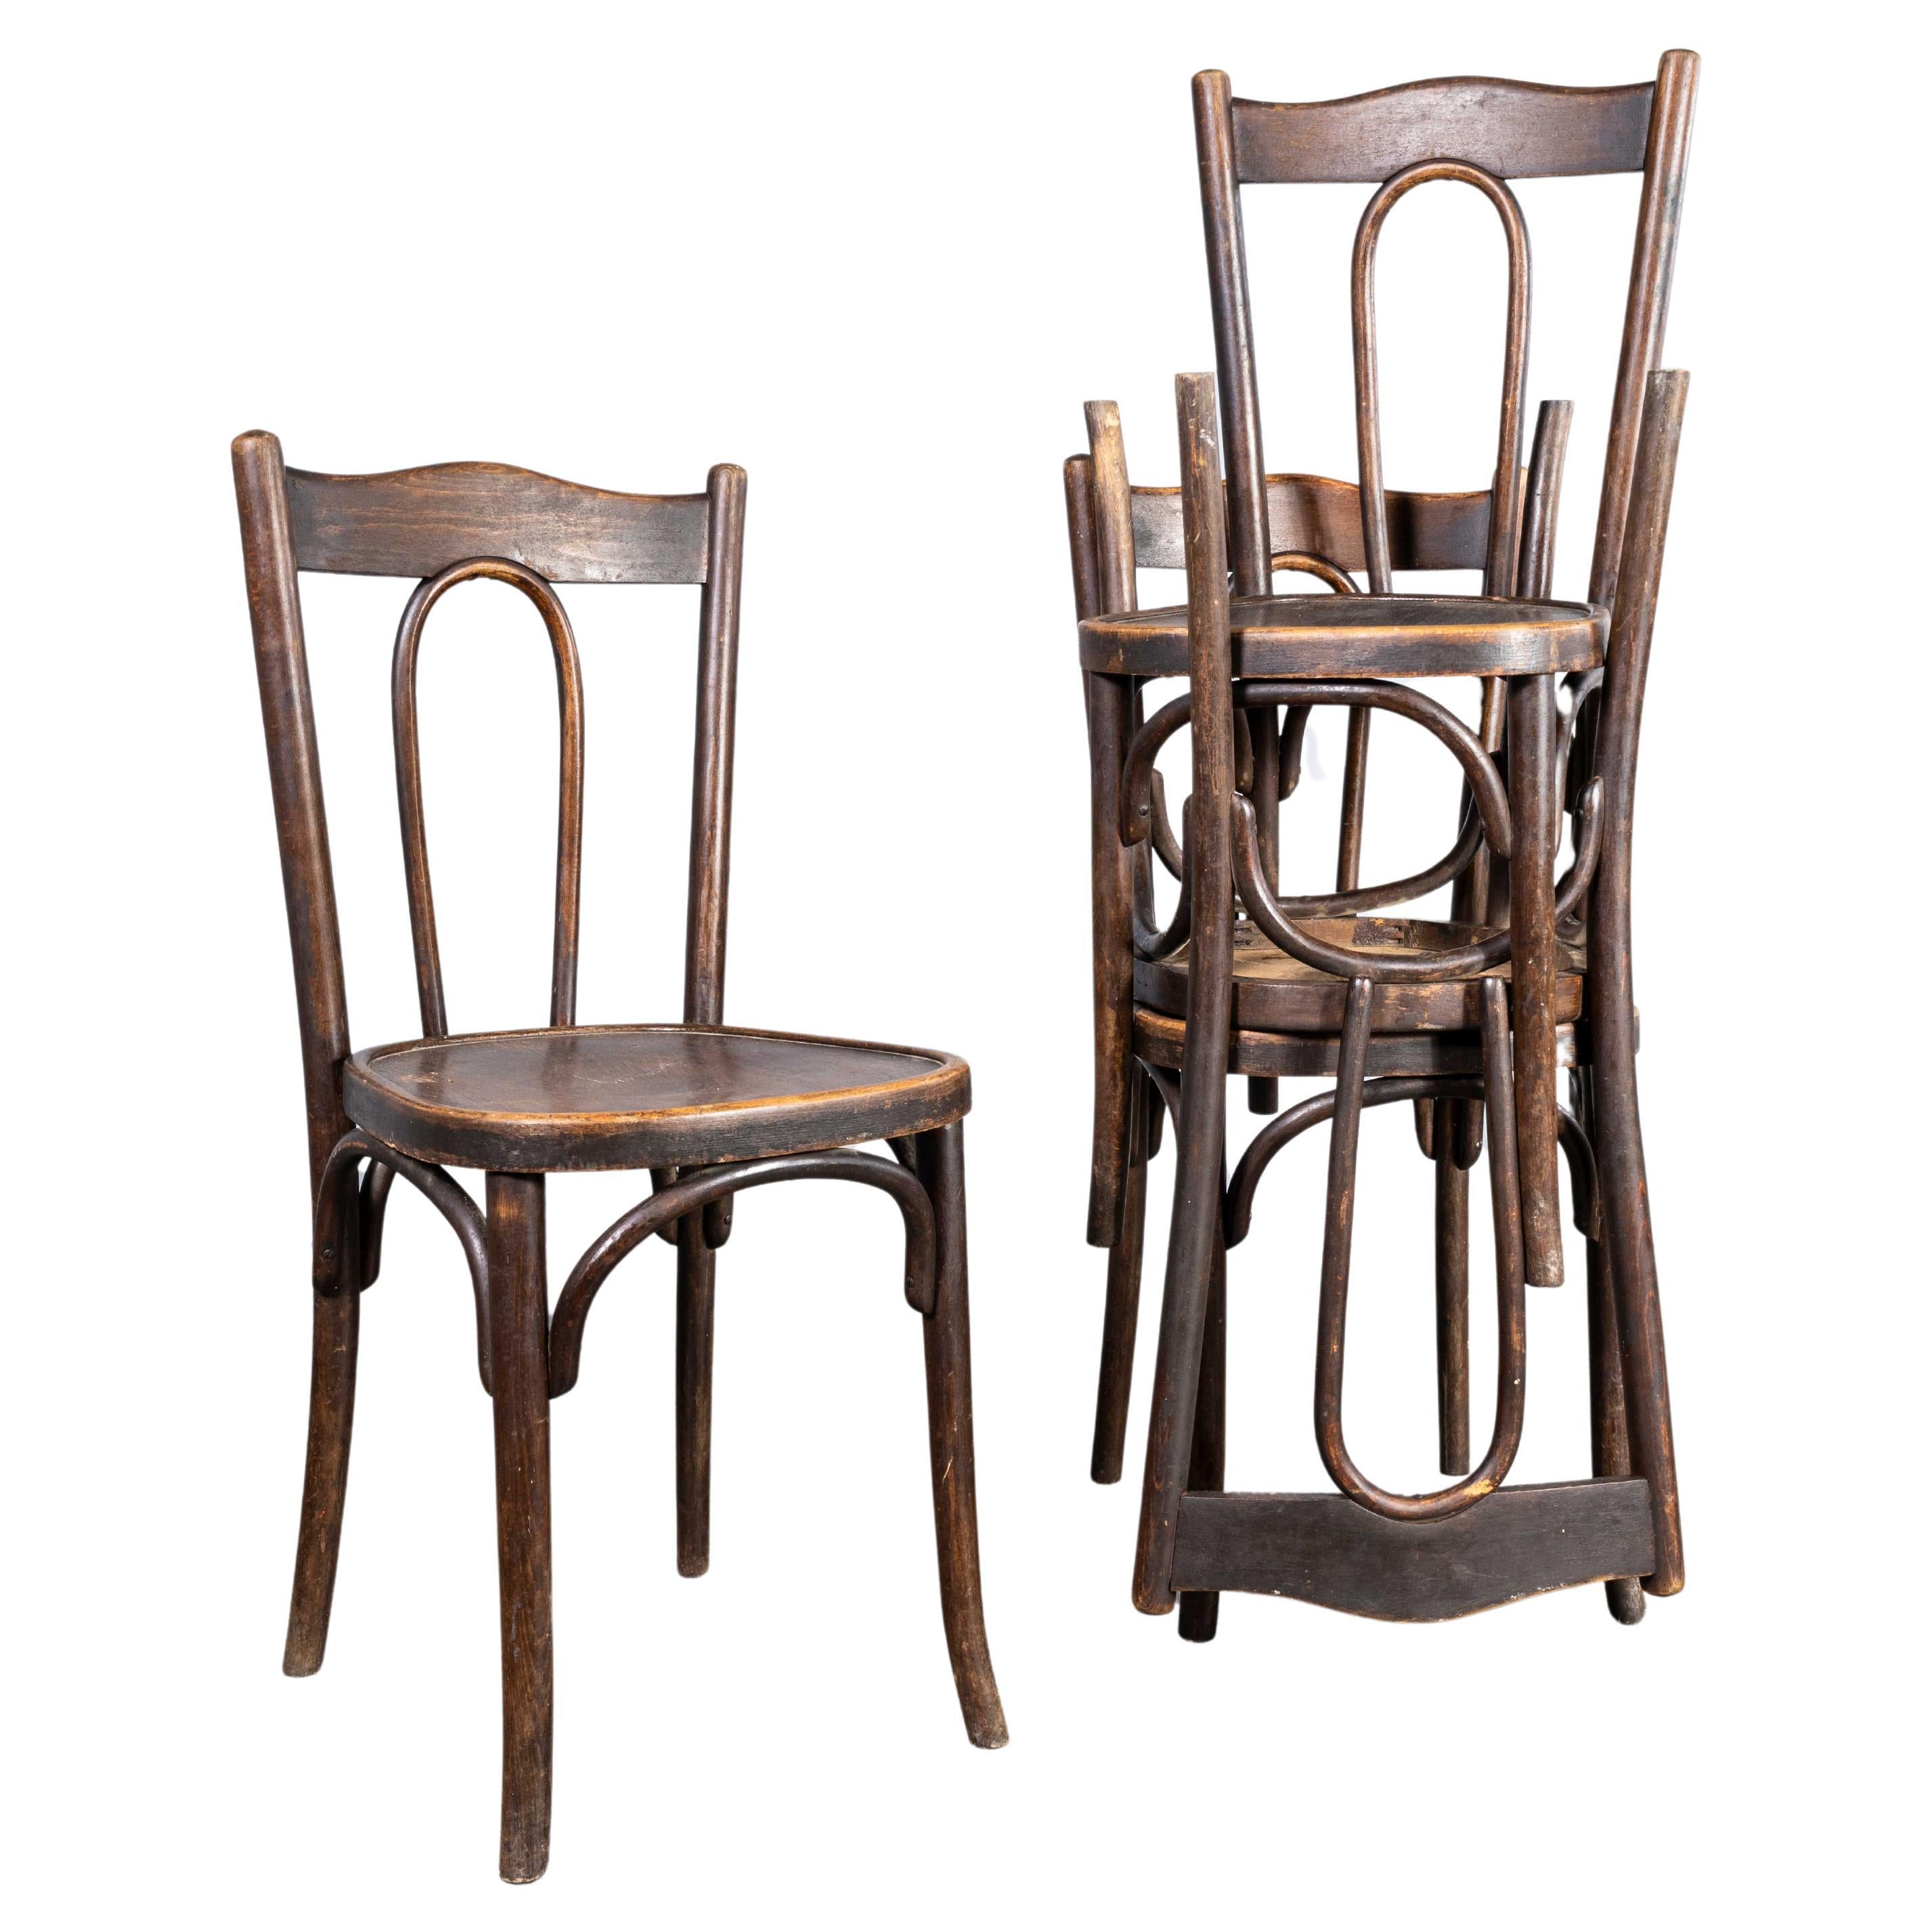 1910’s Bentwood Debrecen Early Hoop Back Dining Chairs – Set Of Four